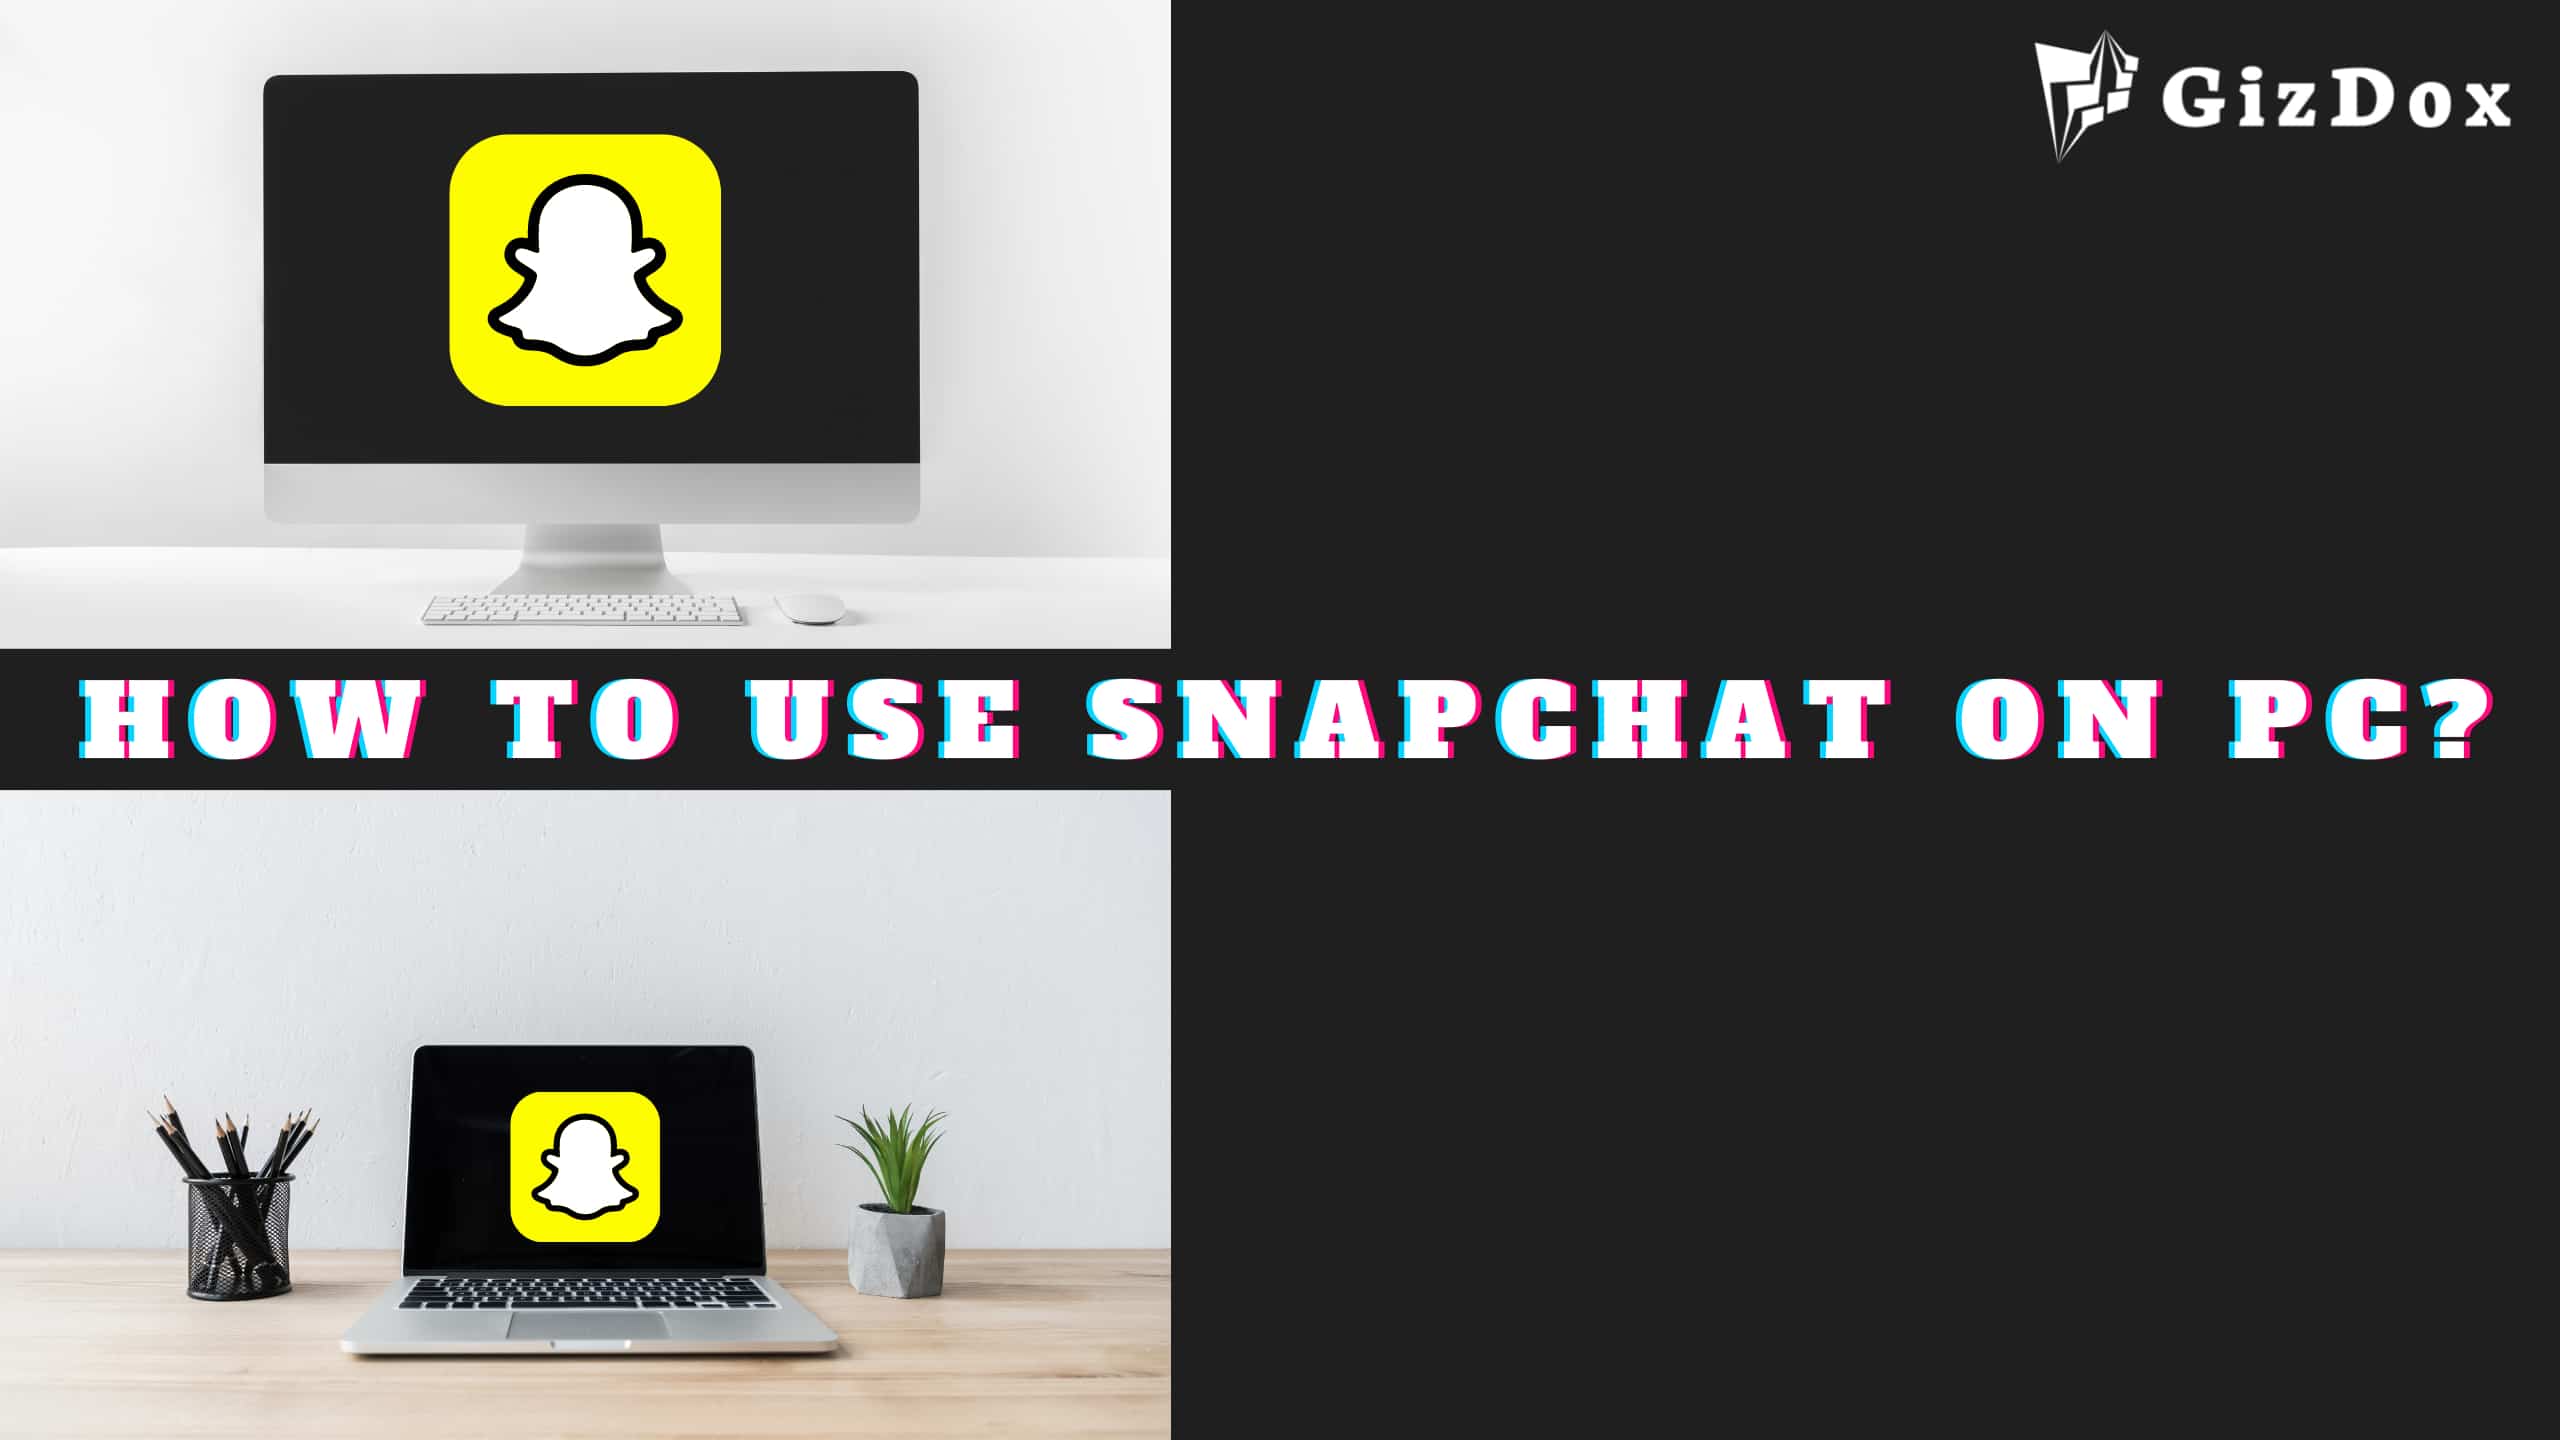 How To Use Snapchat on PC, Mac, Web, & Laptop in 2023?